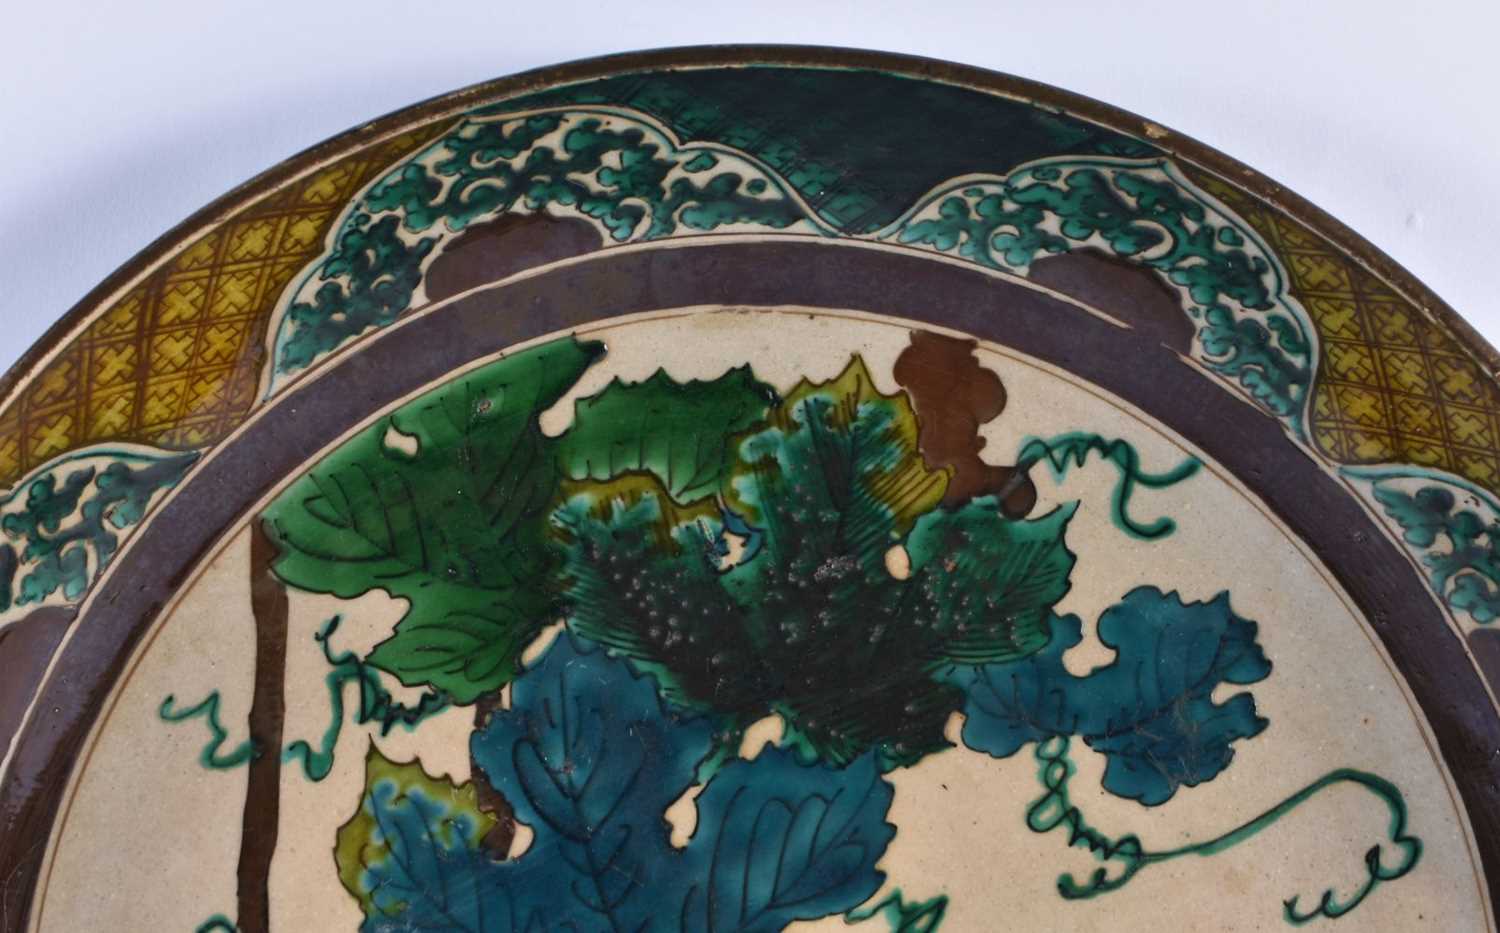 A LARGE 18TH CENTURY JAPANESE EDO PERIOD AO KUTANI DISH painted with flowers and landscapes. 37 cm - Image 2 of 6